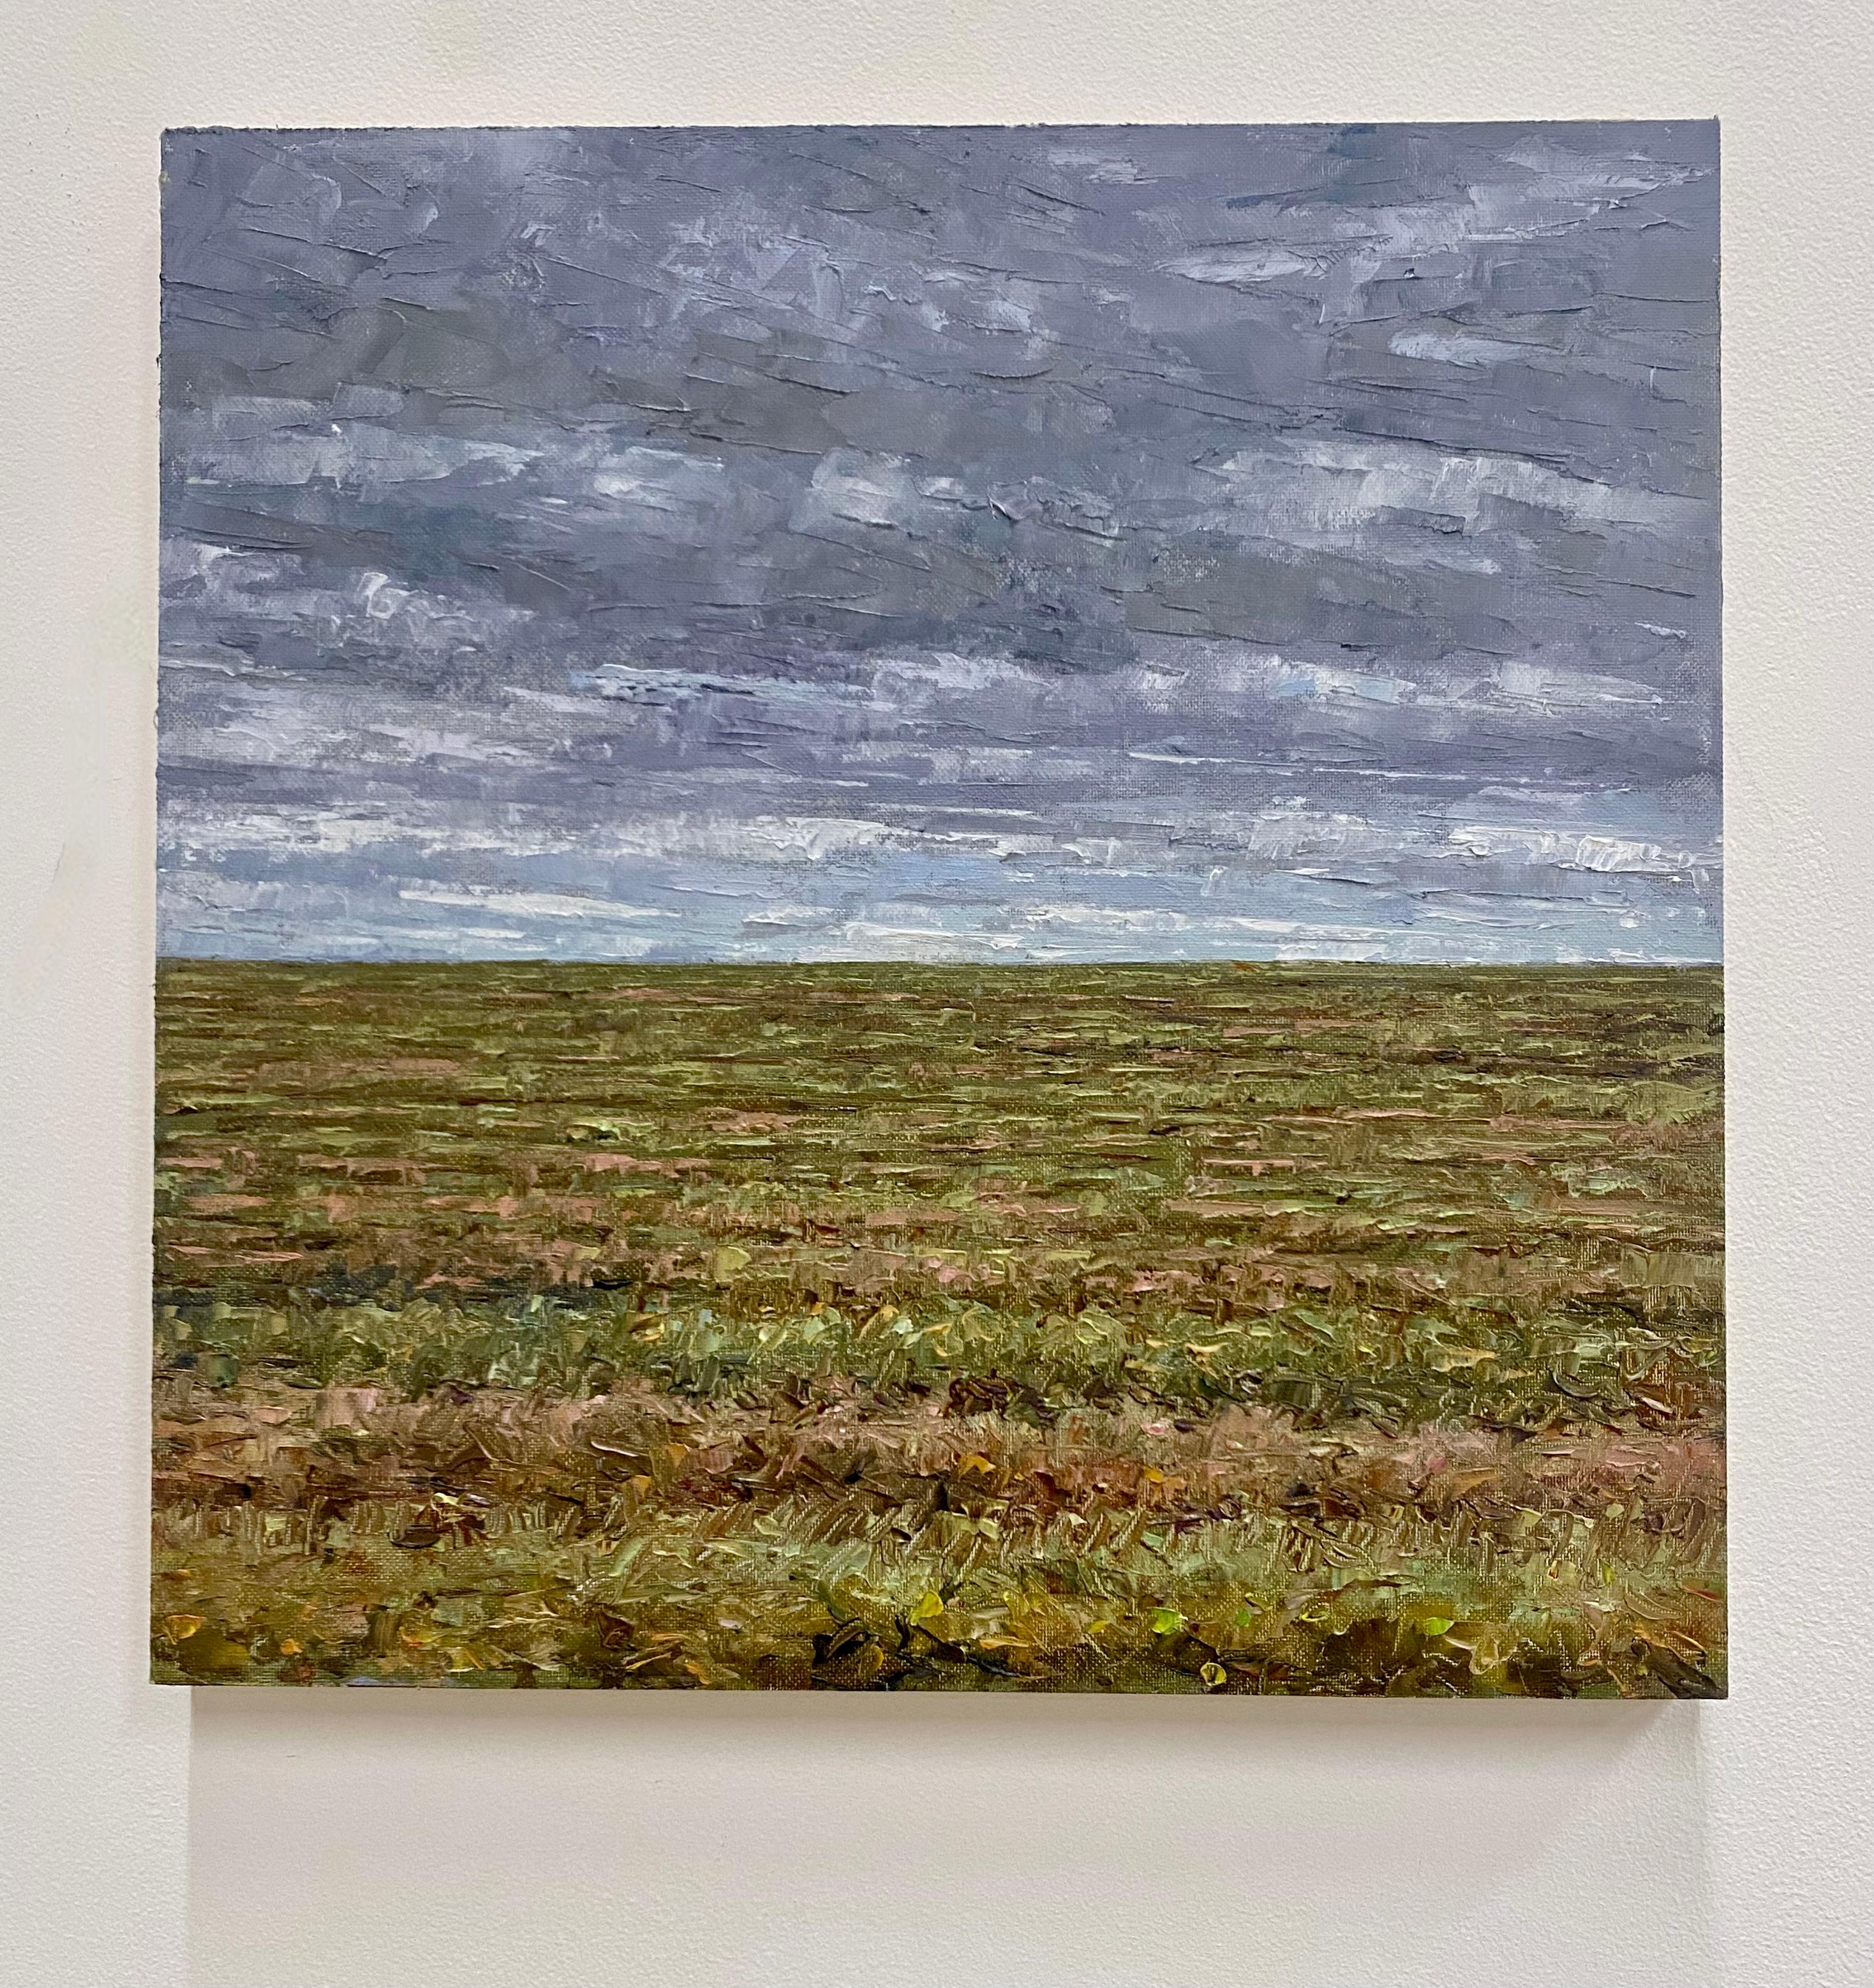 A peaceful outdoor scene in autumn: a delicately painted field beneath a gray, cloudy sky, beautifully capturing the idyllic feel of a field in late October. Signed, dated and titled on verso.

The paintings of Thomas Sarrantonio seek to mediate